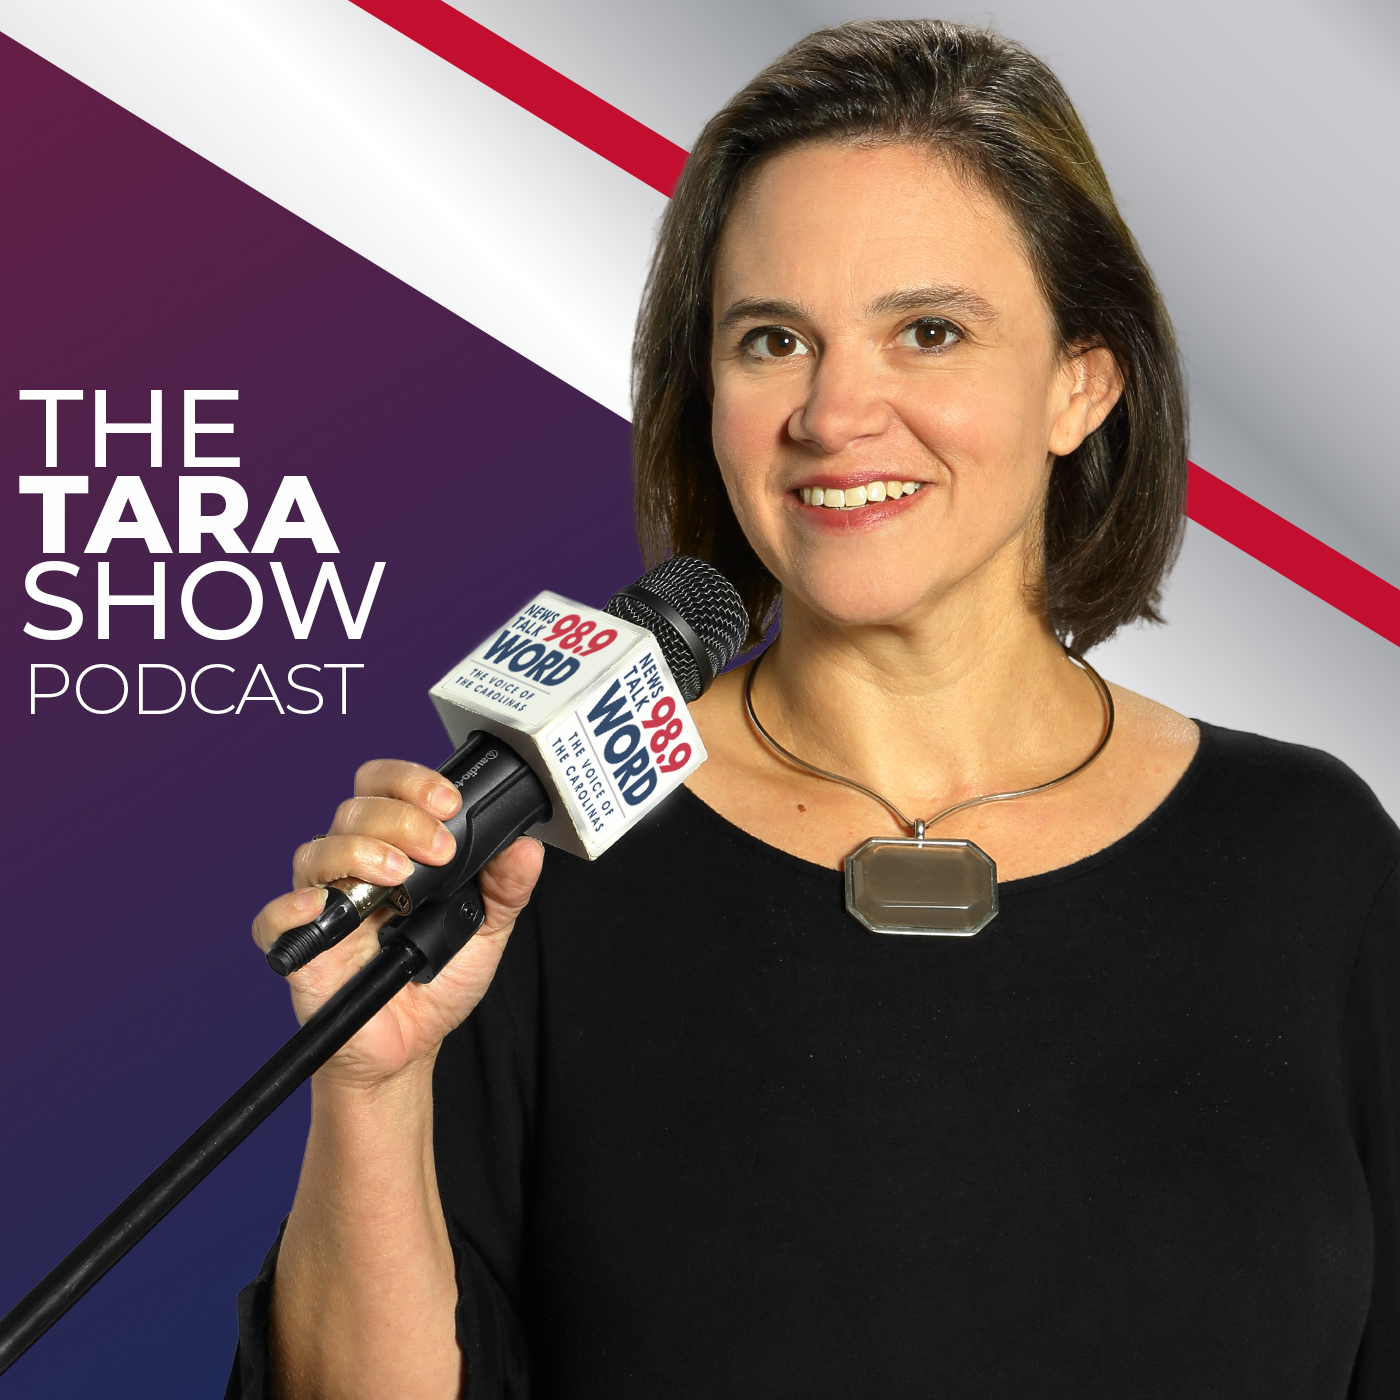 Hour 4: The Tara Show - “The Big Revolving Border Door” “Pure unadulterated Law-Fare” “Tara’s Warning about Sherri Biggs” “The Text Line Responds to Biggs and Burns Debate” 